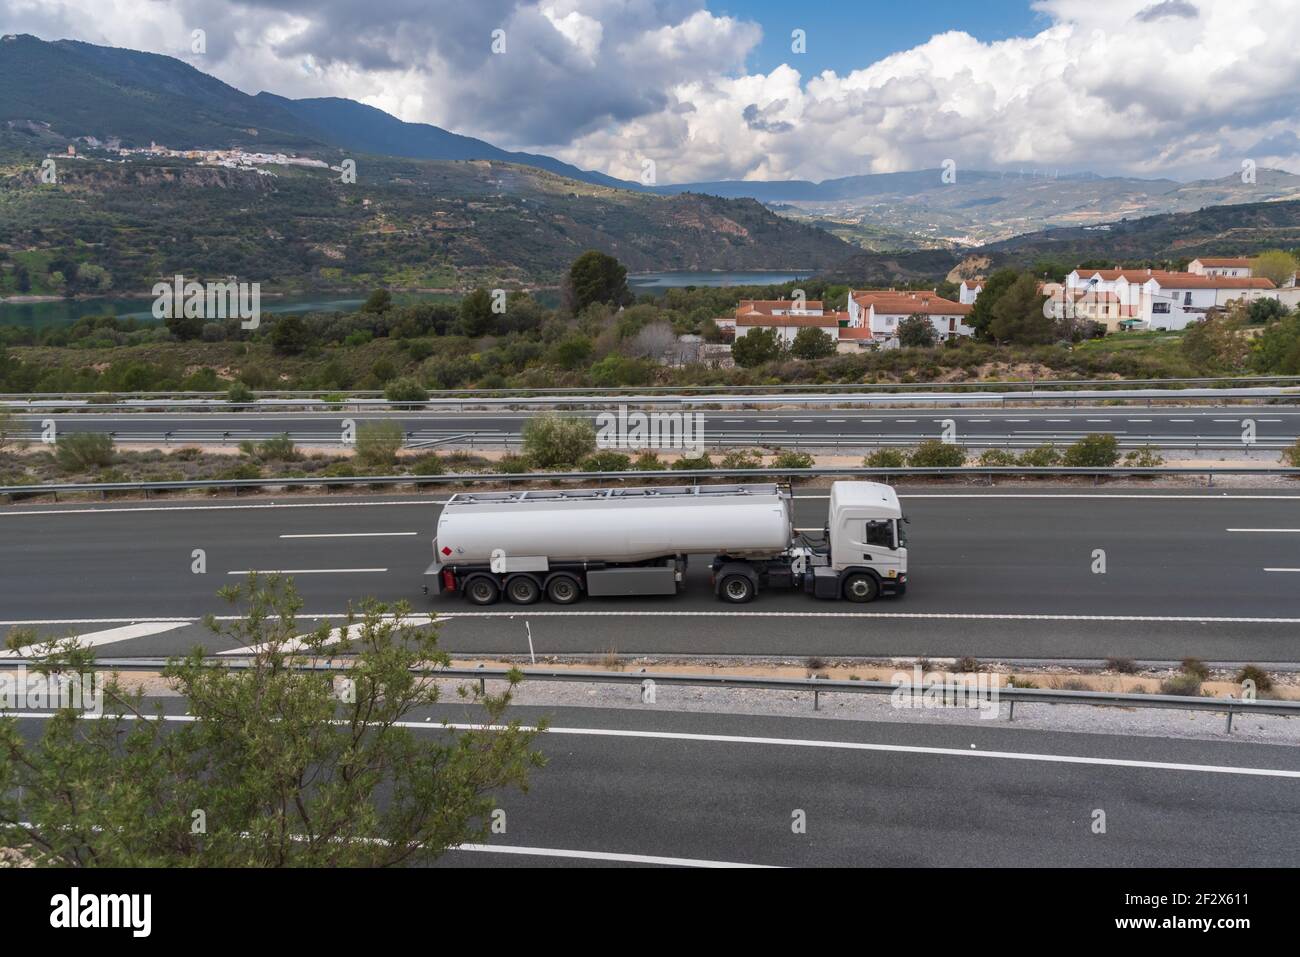 Tank truck driving on the highway with a landscape of mountains, clouds, a reservoir and a town in the background. Stock Photo